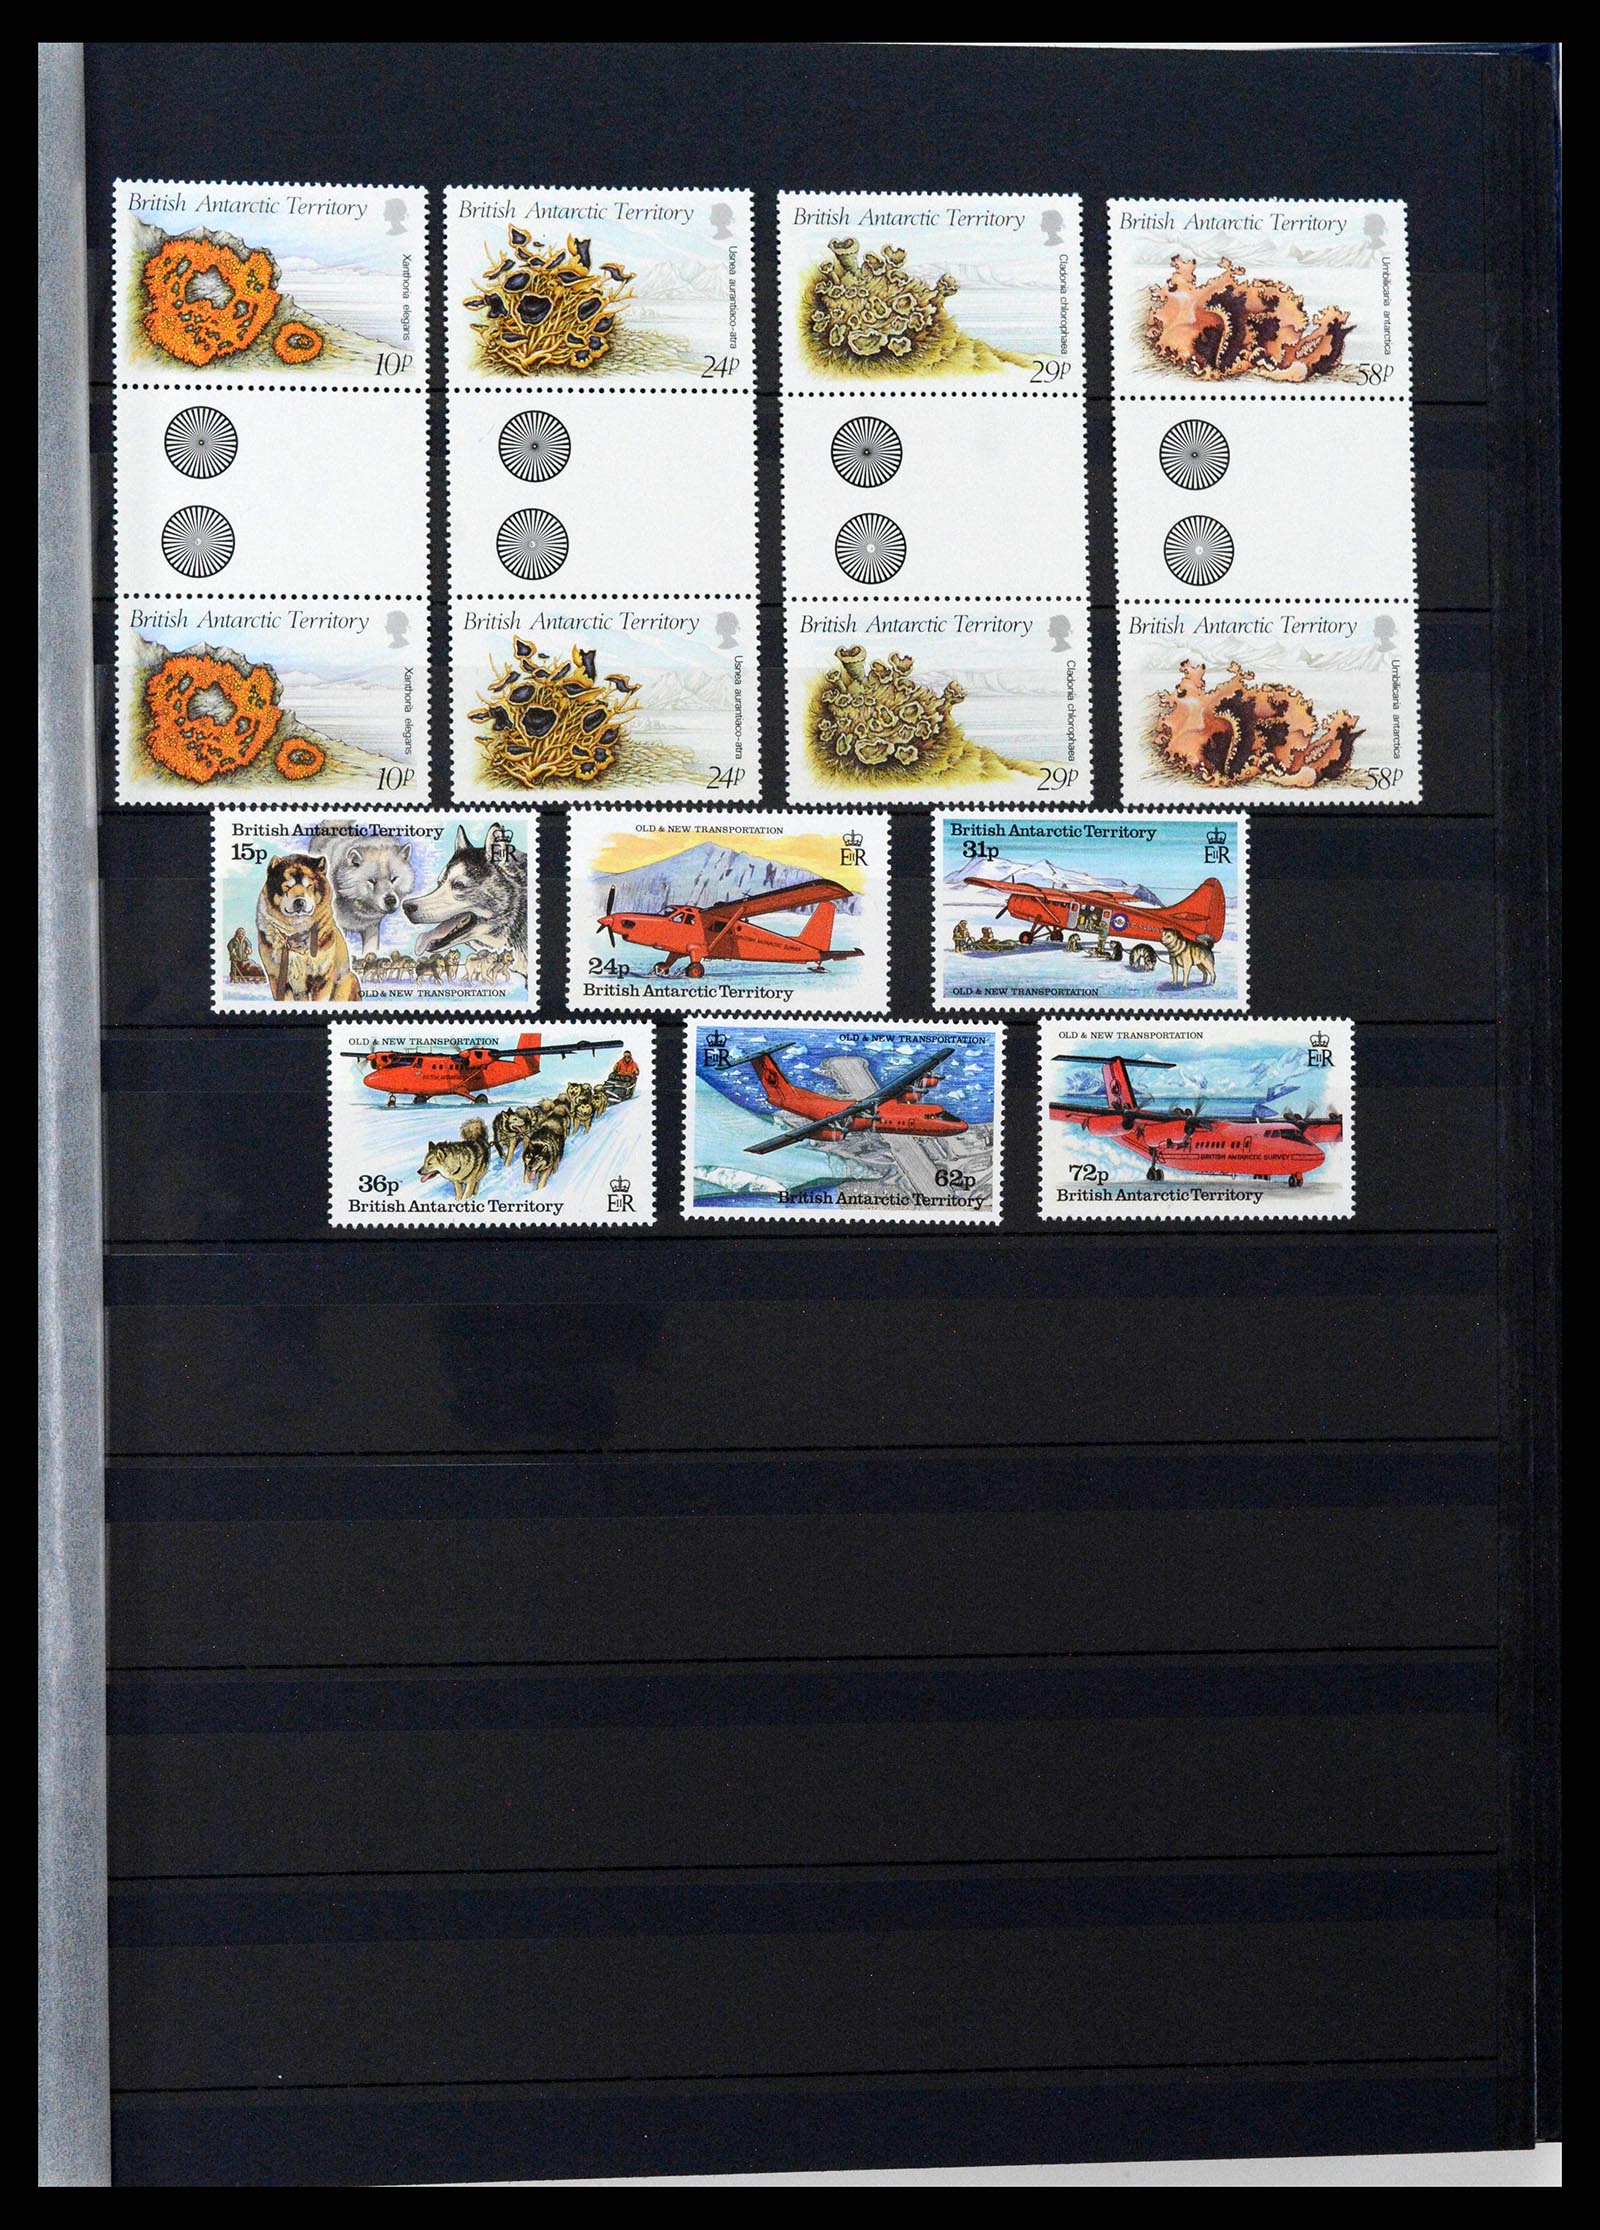 38746 0011 - Stamp collection 38746 British colonies 1980s-1990s.